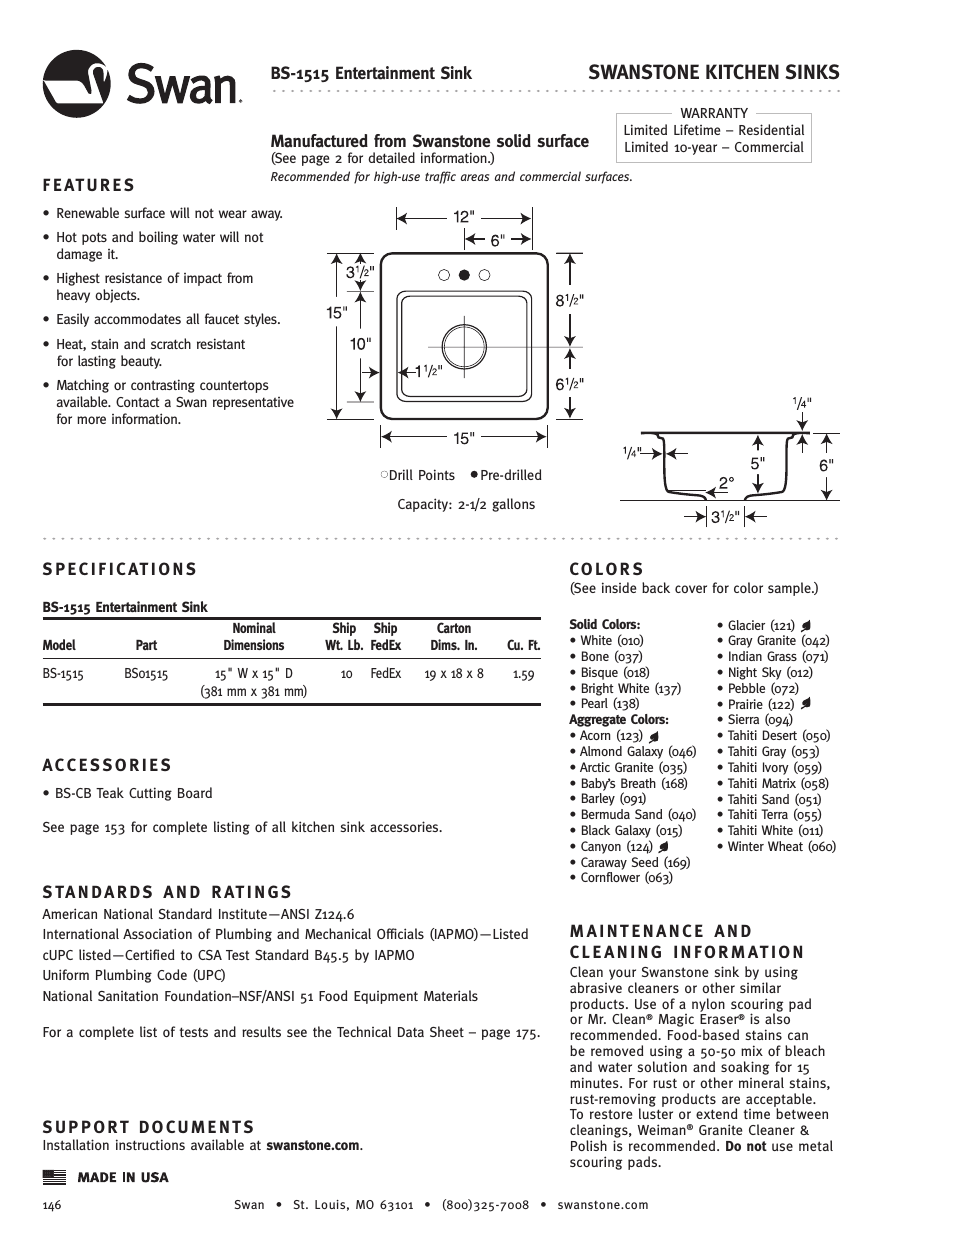 BS-1515 - Specification